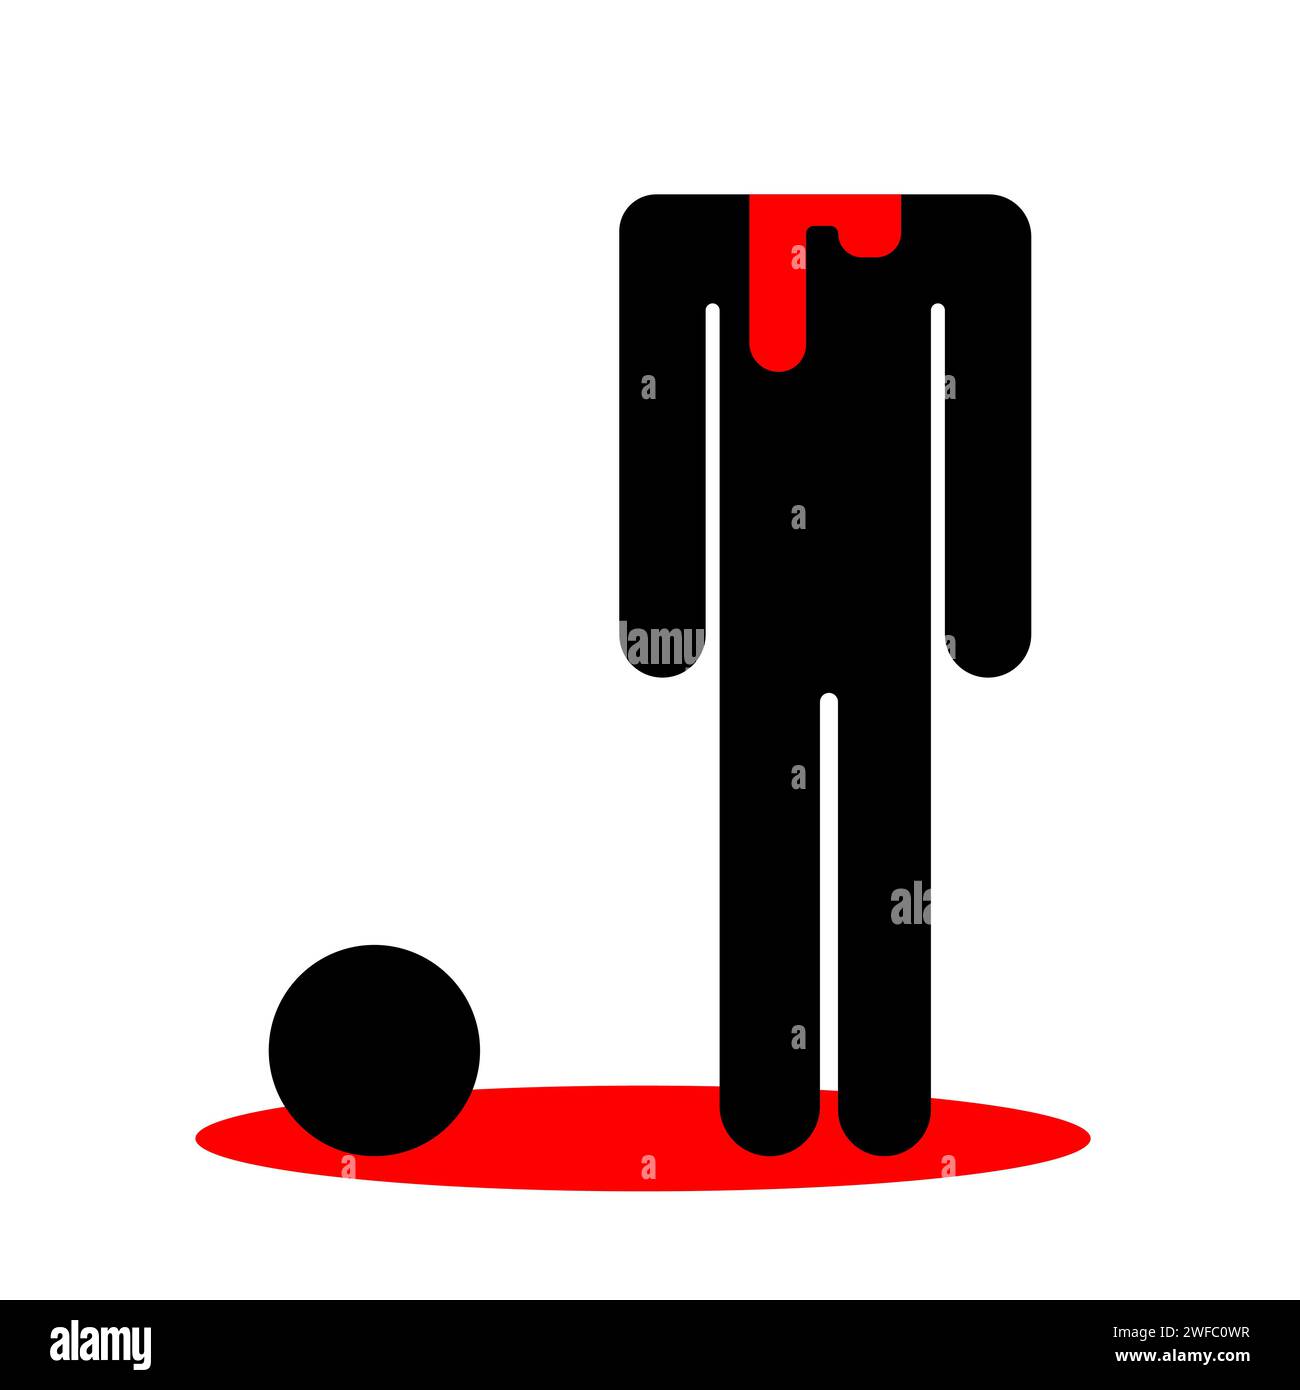 Man with severed head. In pool of blood. Dead body. Human silhouette. Crime scene. Vector illustration. Stock image. EPS 10. Stock Vector